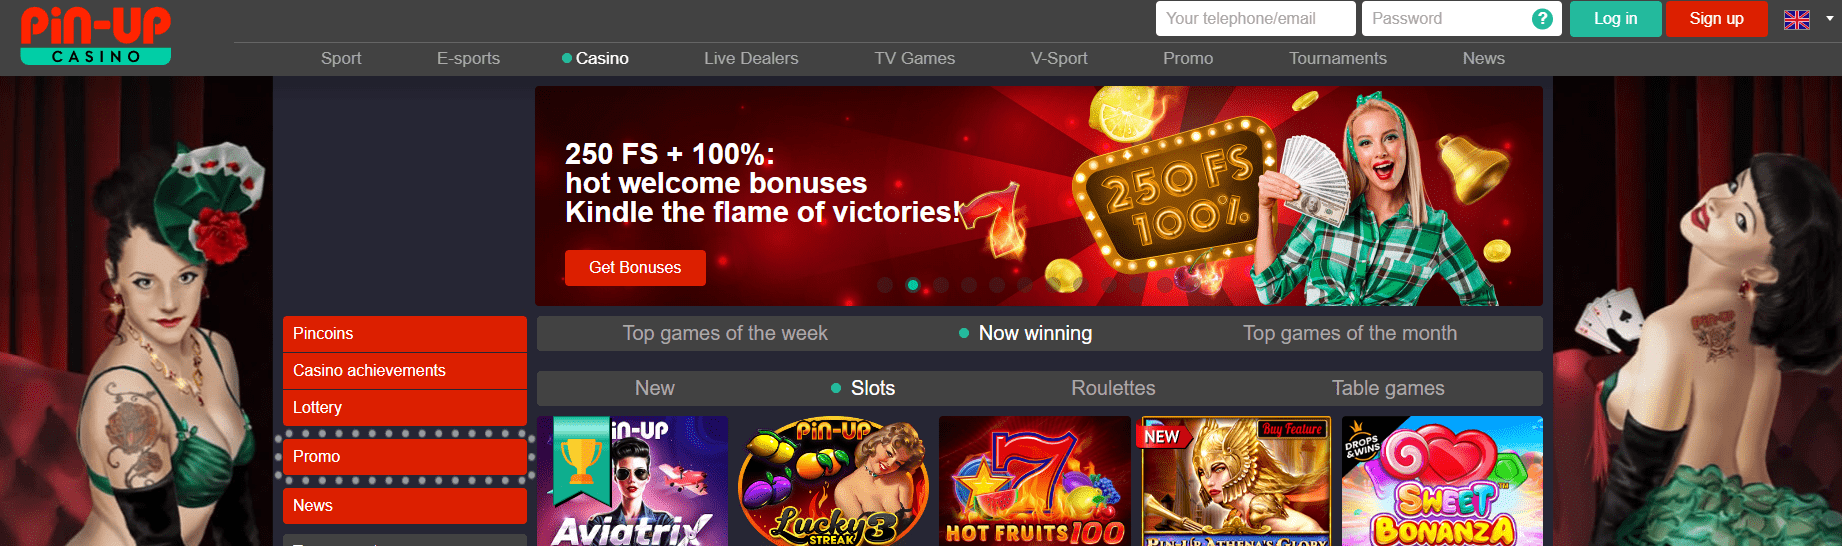 Official site of Pin-Up Casino